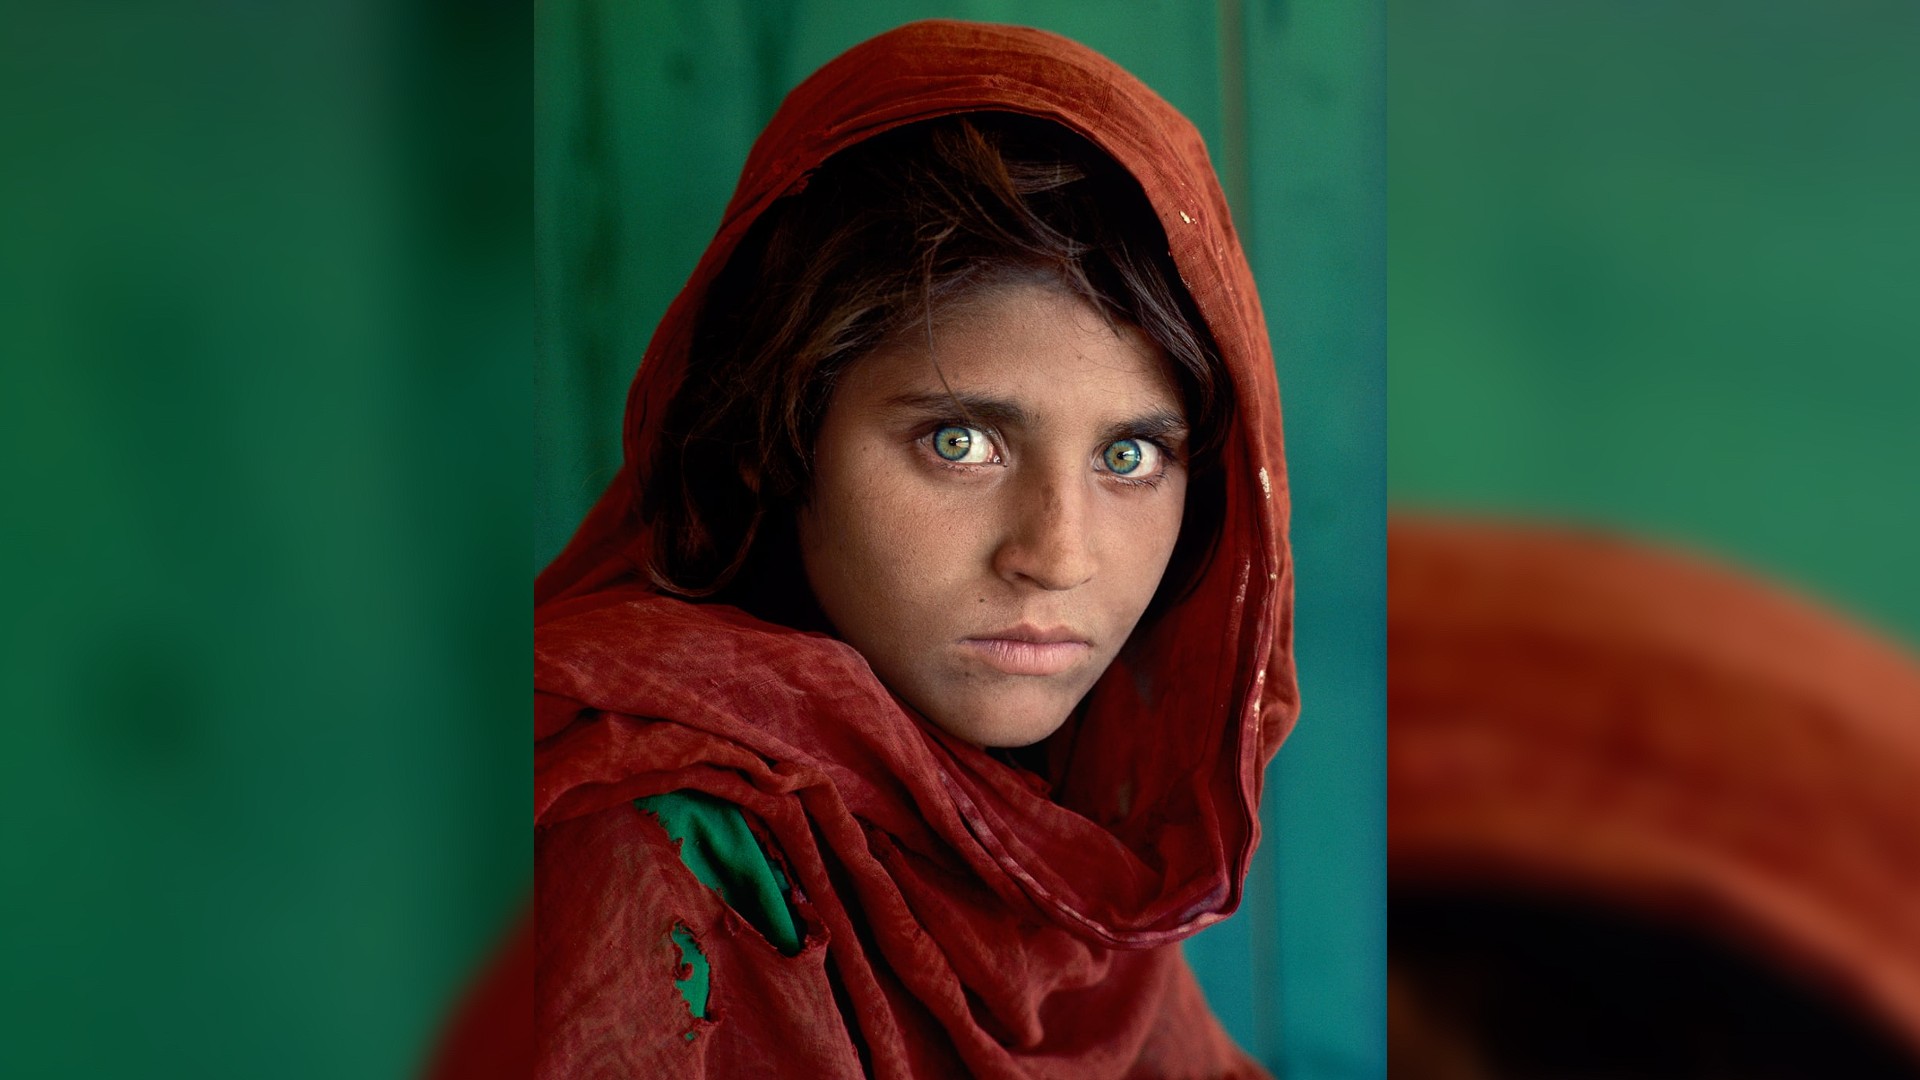 Shelter was provided to NatGeo magazine’s famous “Afghan woman”